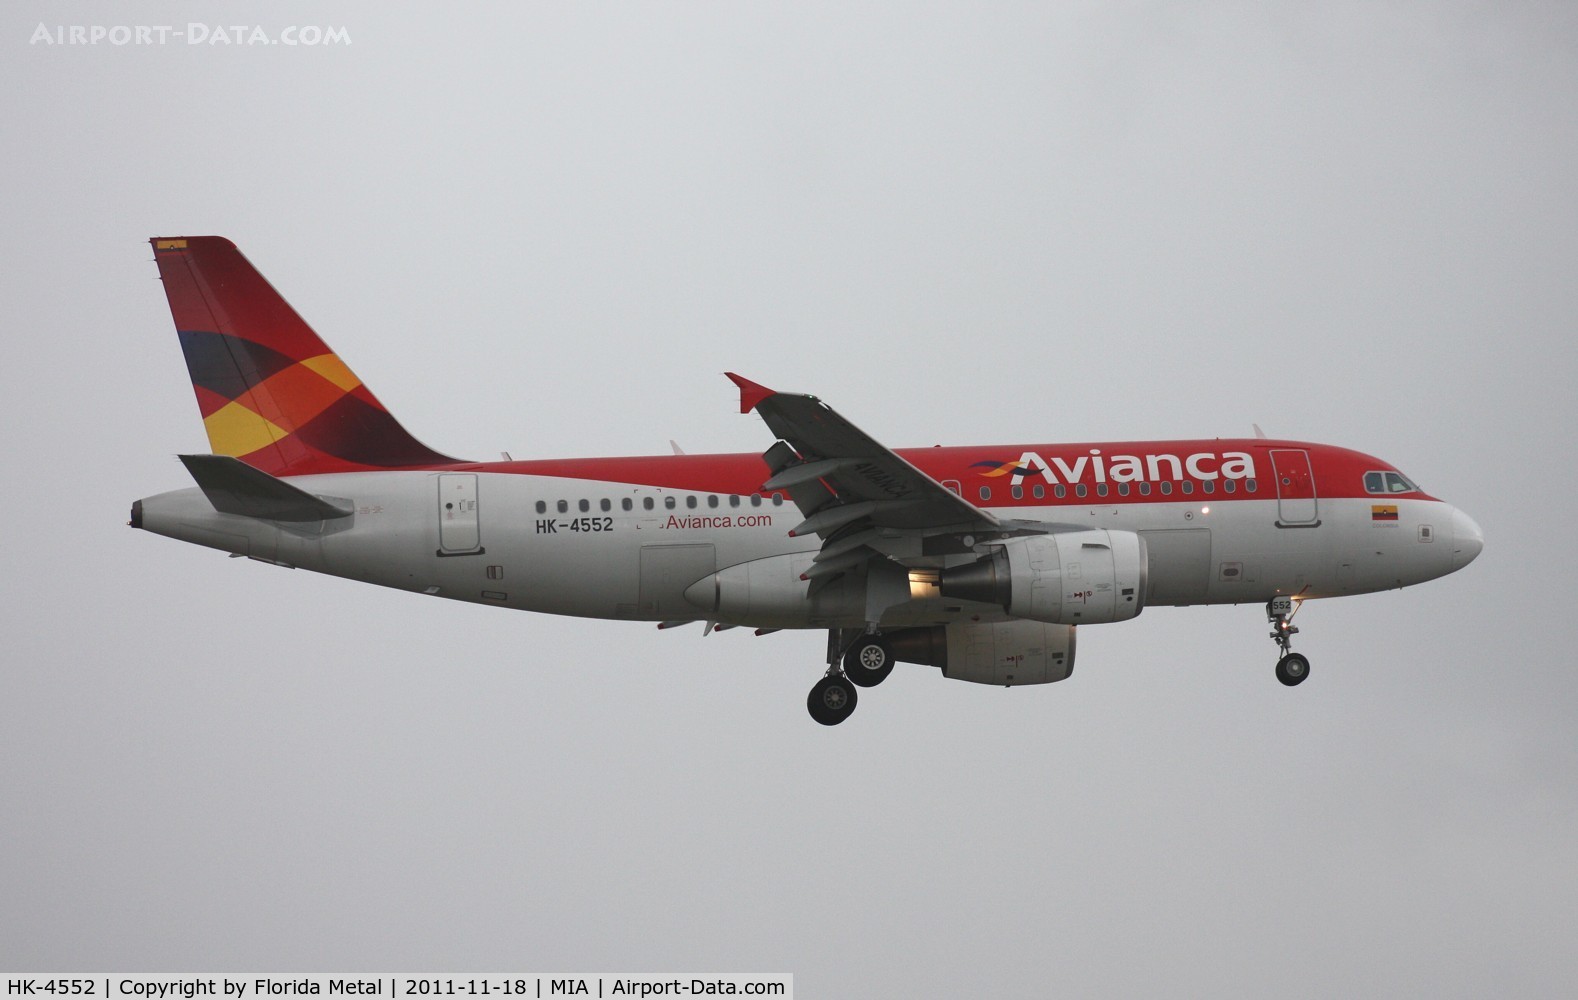 HK-4552, 2008 Airbus A319-115 C/N 3518, New Avianca A319 to database